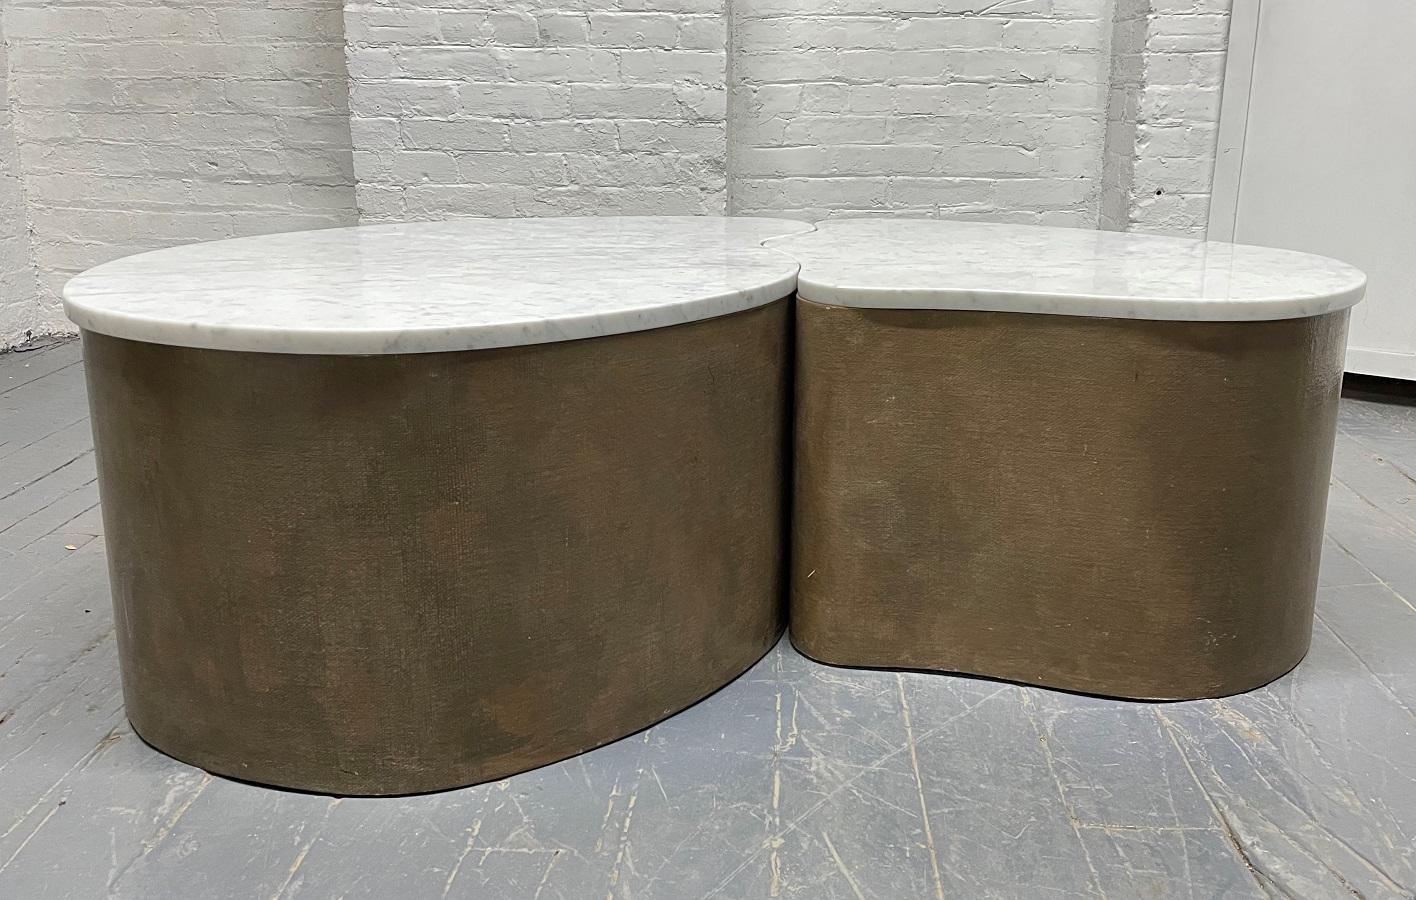 Biomorphic Grasscloth and Carrara marble-top coffee table. The tables have grasscloth bases and can be used together or separately as end tables.